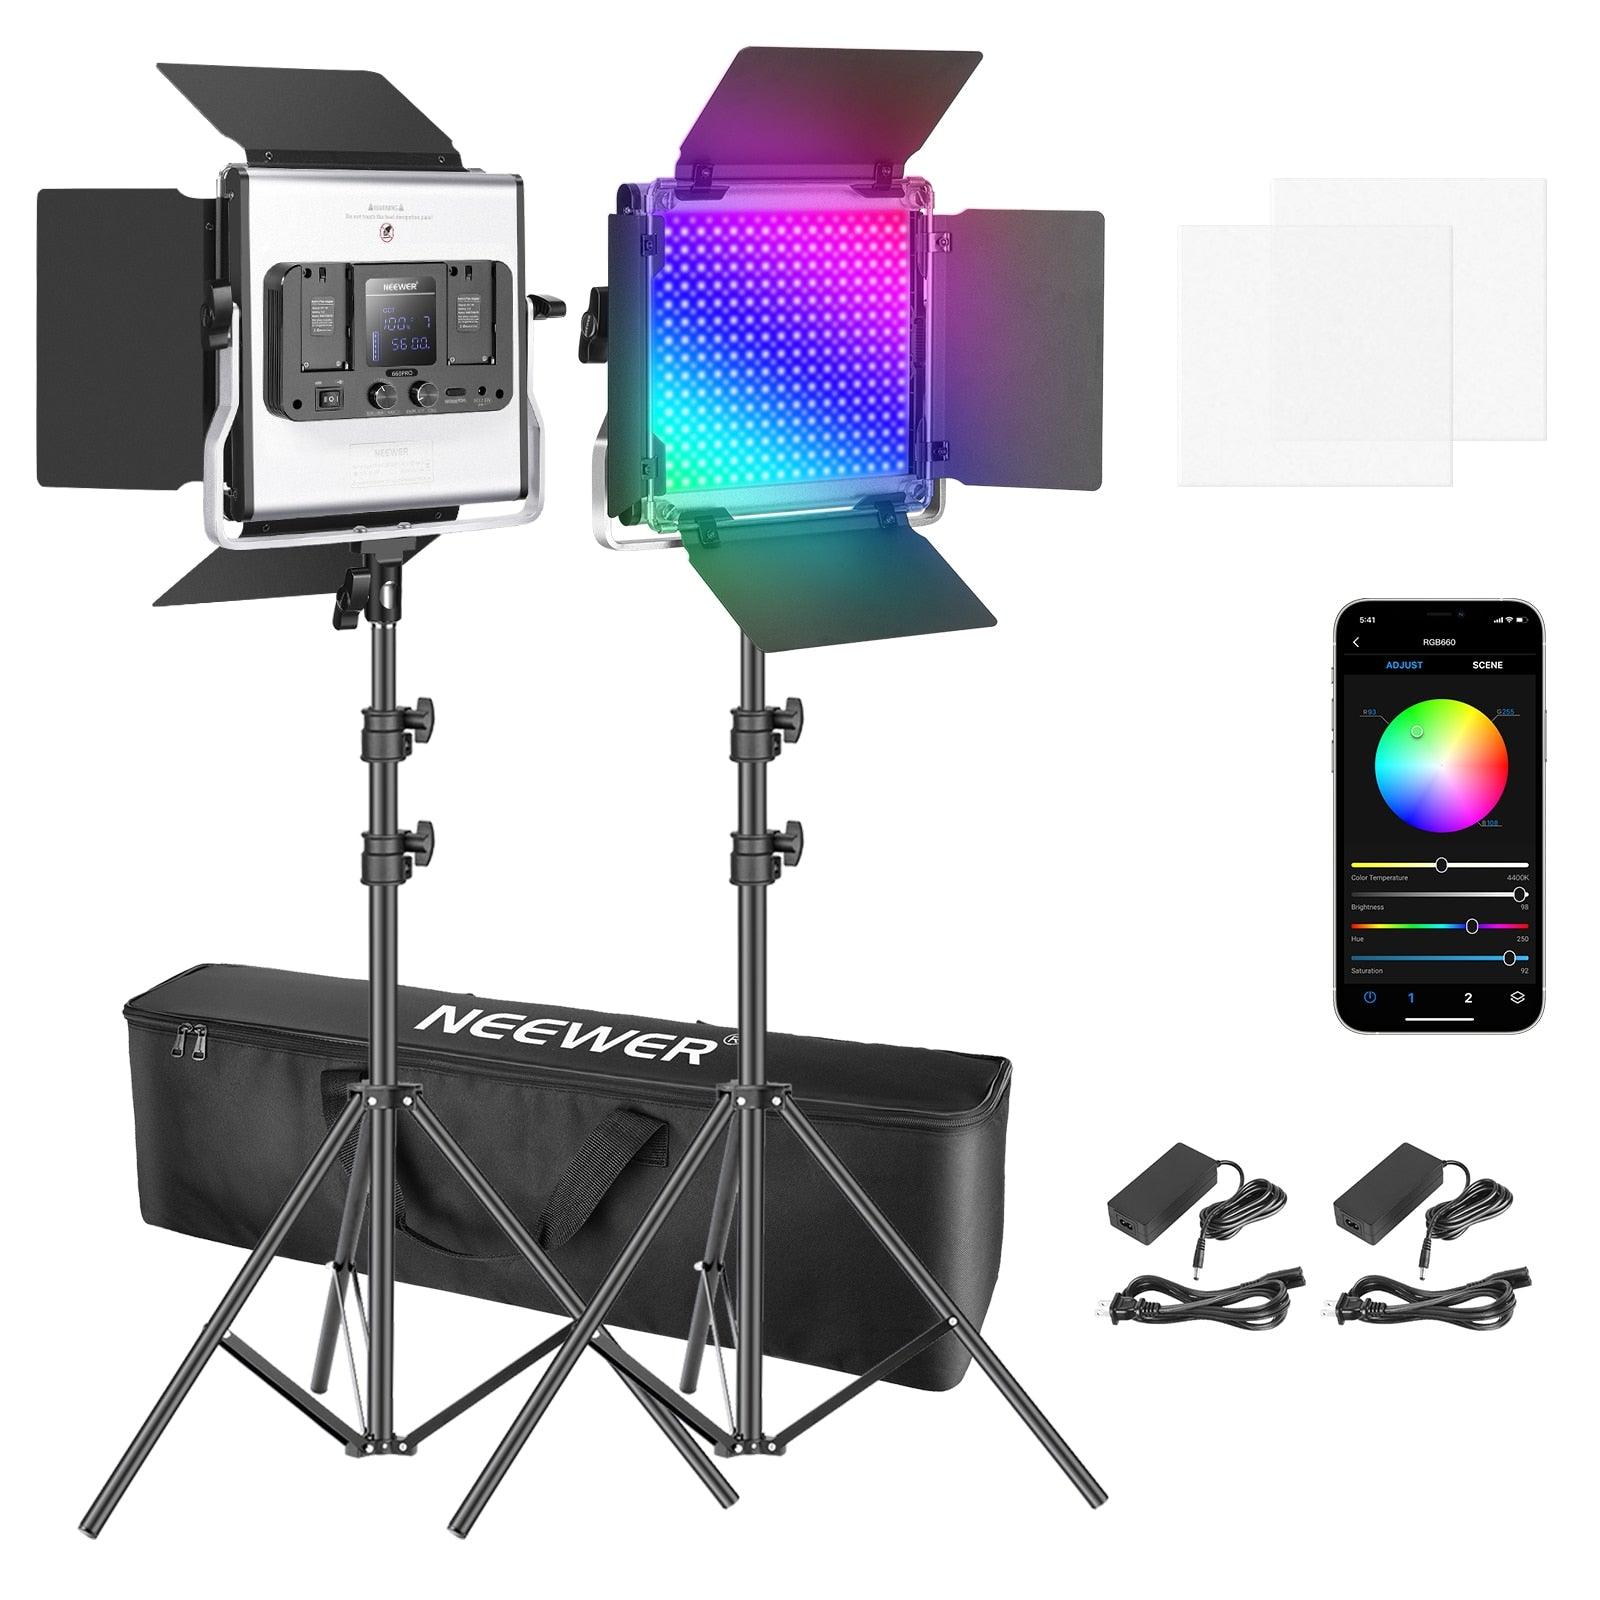 Neewer 18-inch RGB Ring Light with Stand, Dimmable Bi-Color CRI 97